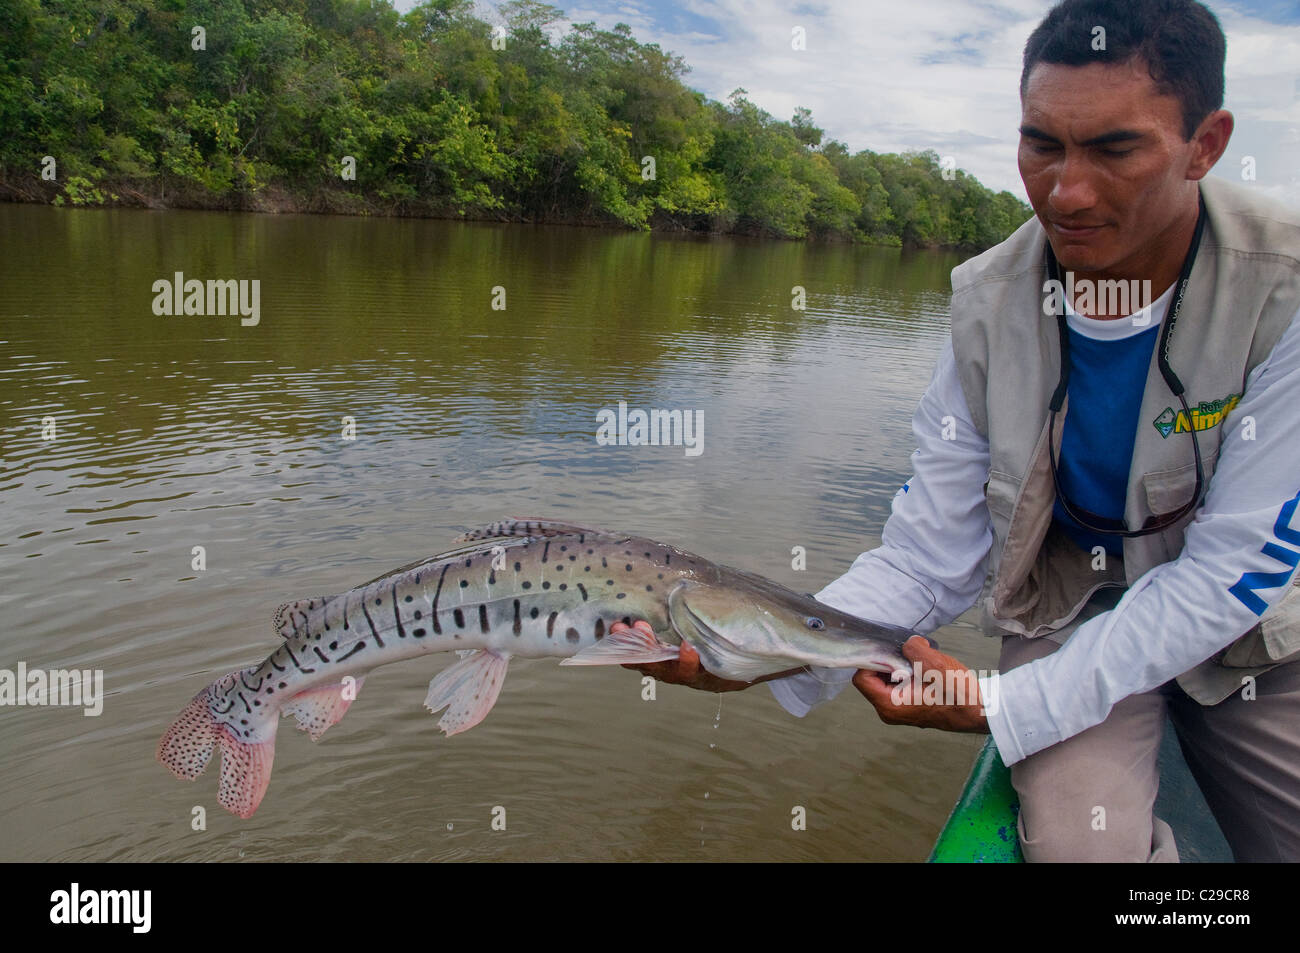 A guide lifts a big striped catfish caught in a deep lagoon off the Rio Bita in Colombia's Amazon Basin. Stock Photo